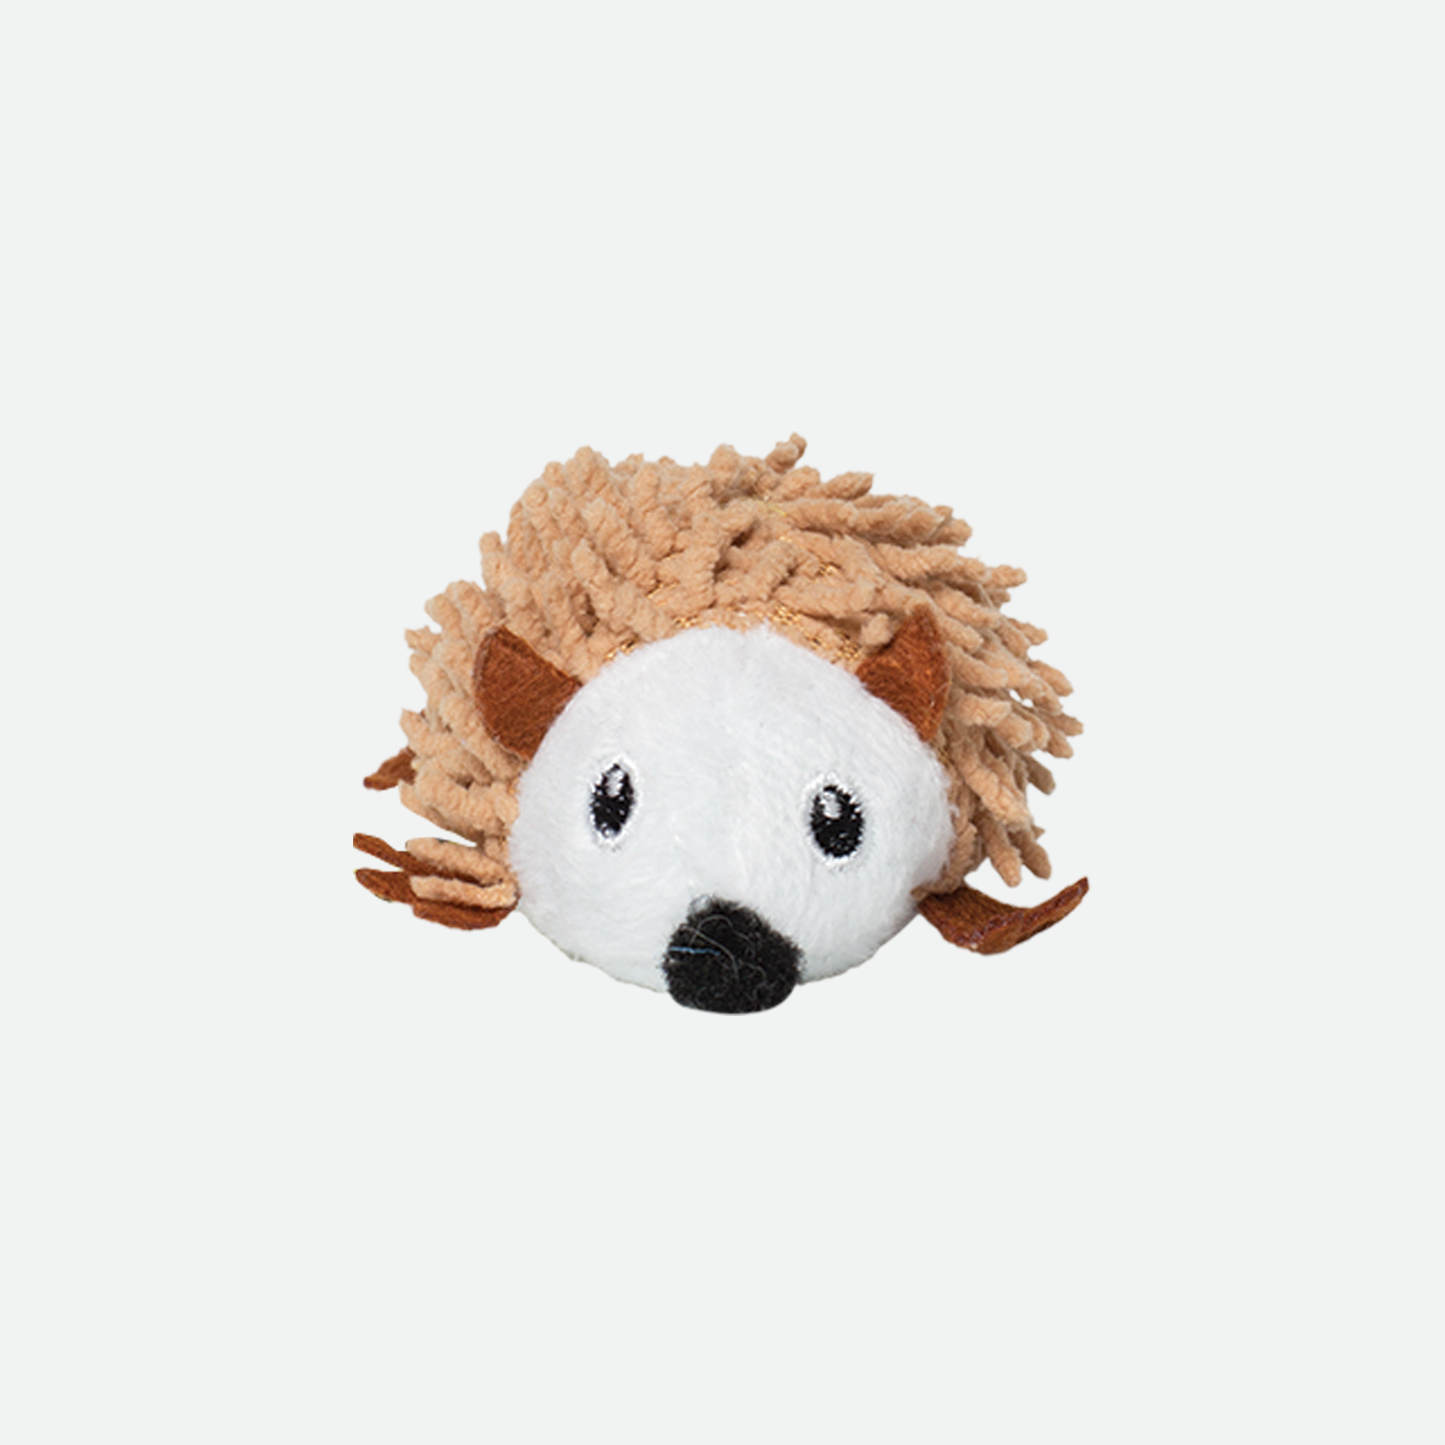 Plush toy for cat, porcupine style